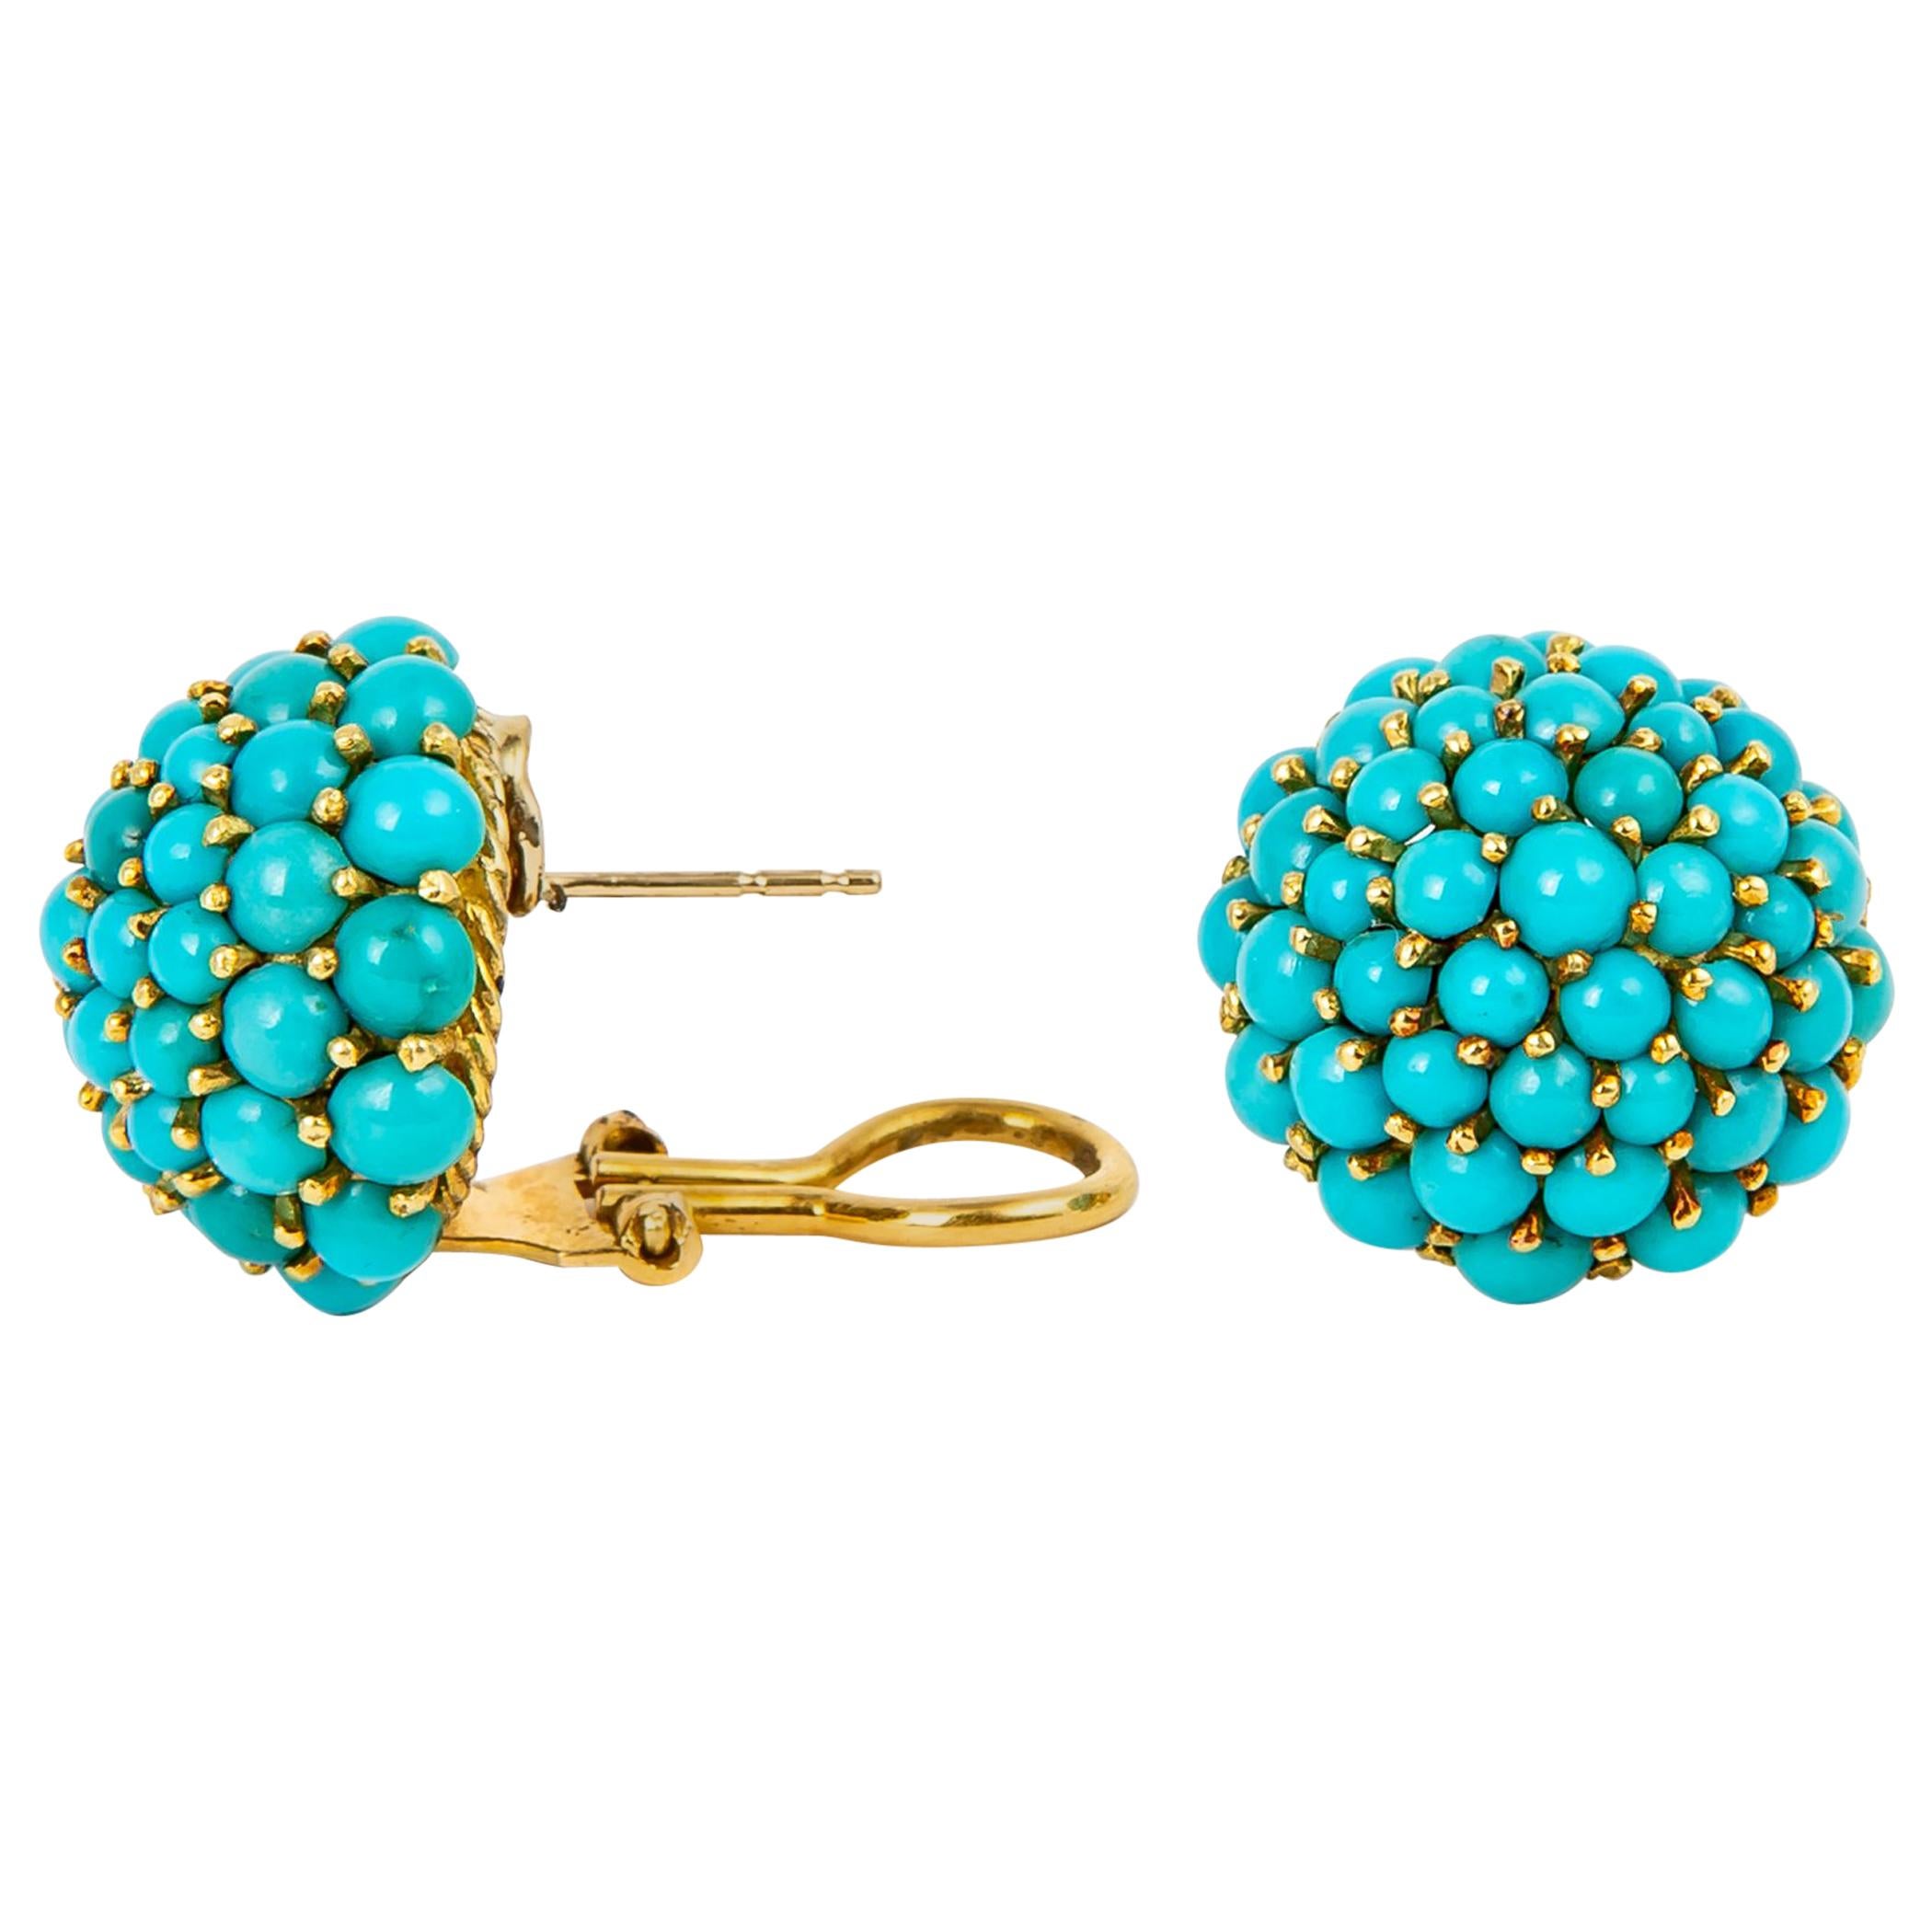 Vintage Turquoise and Gold Dome Earring